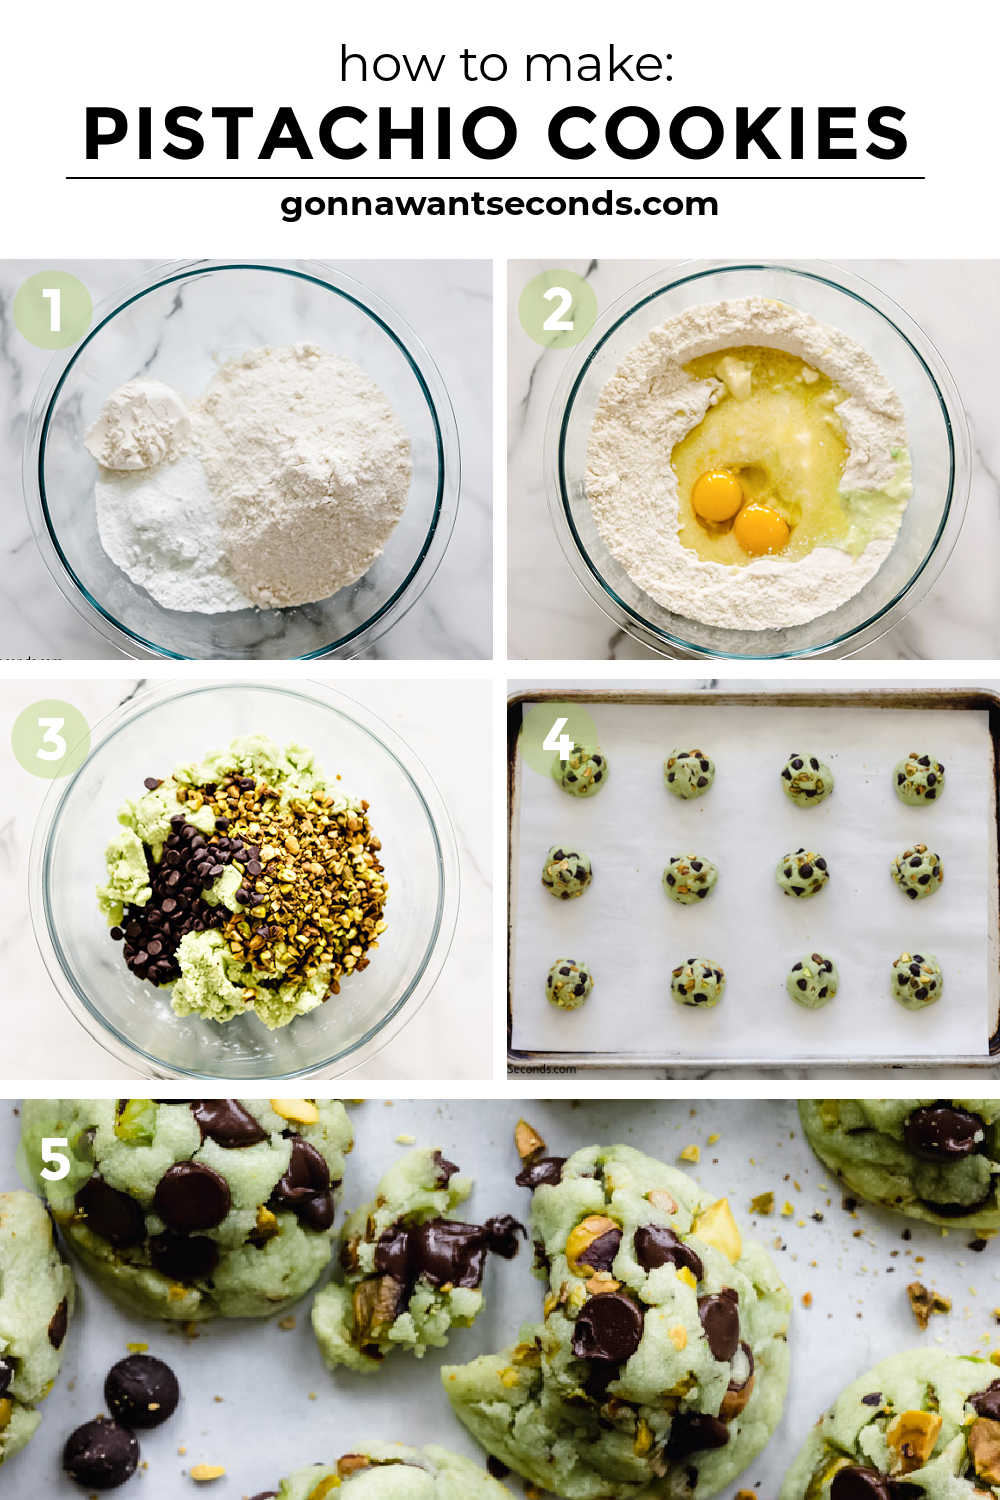 step by step how to make pistachio cookies